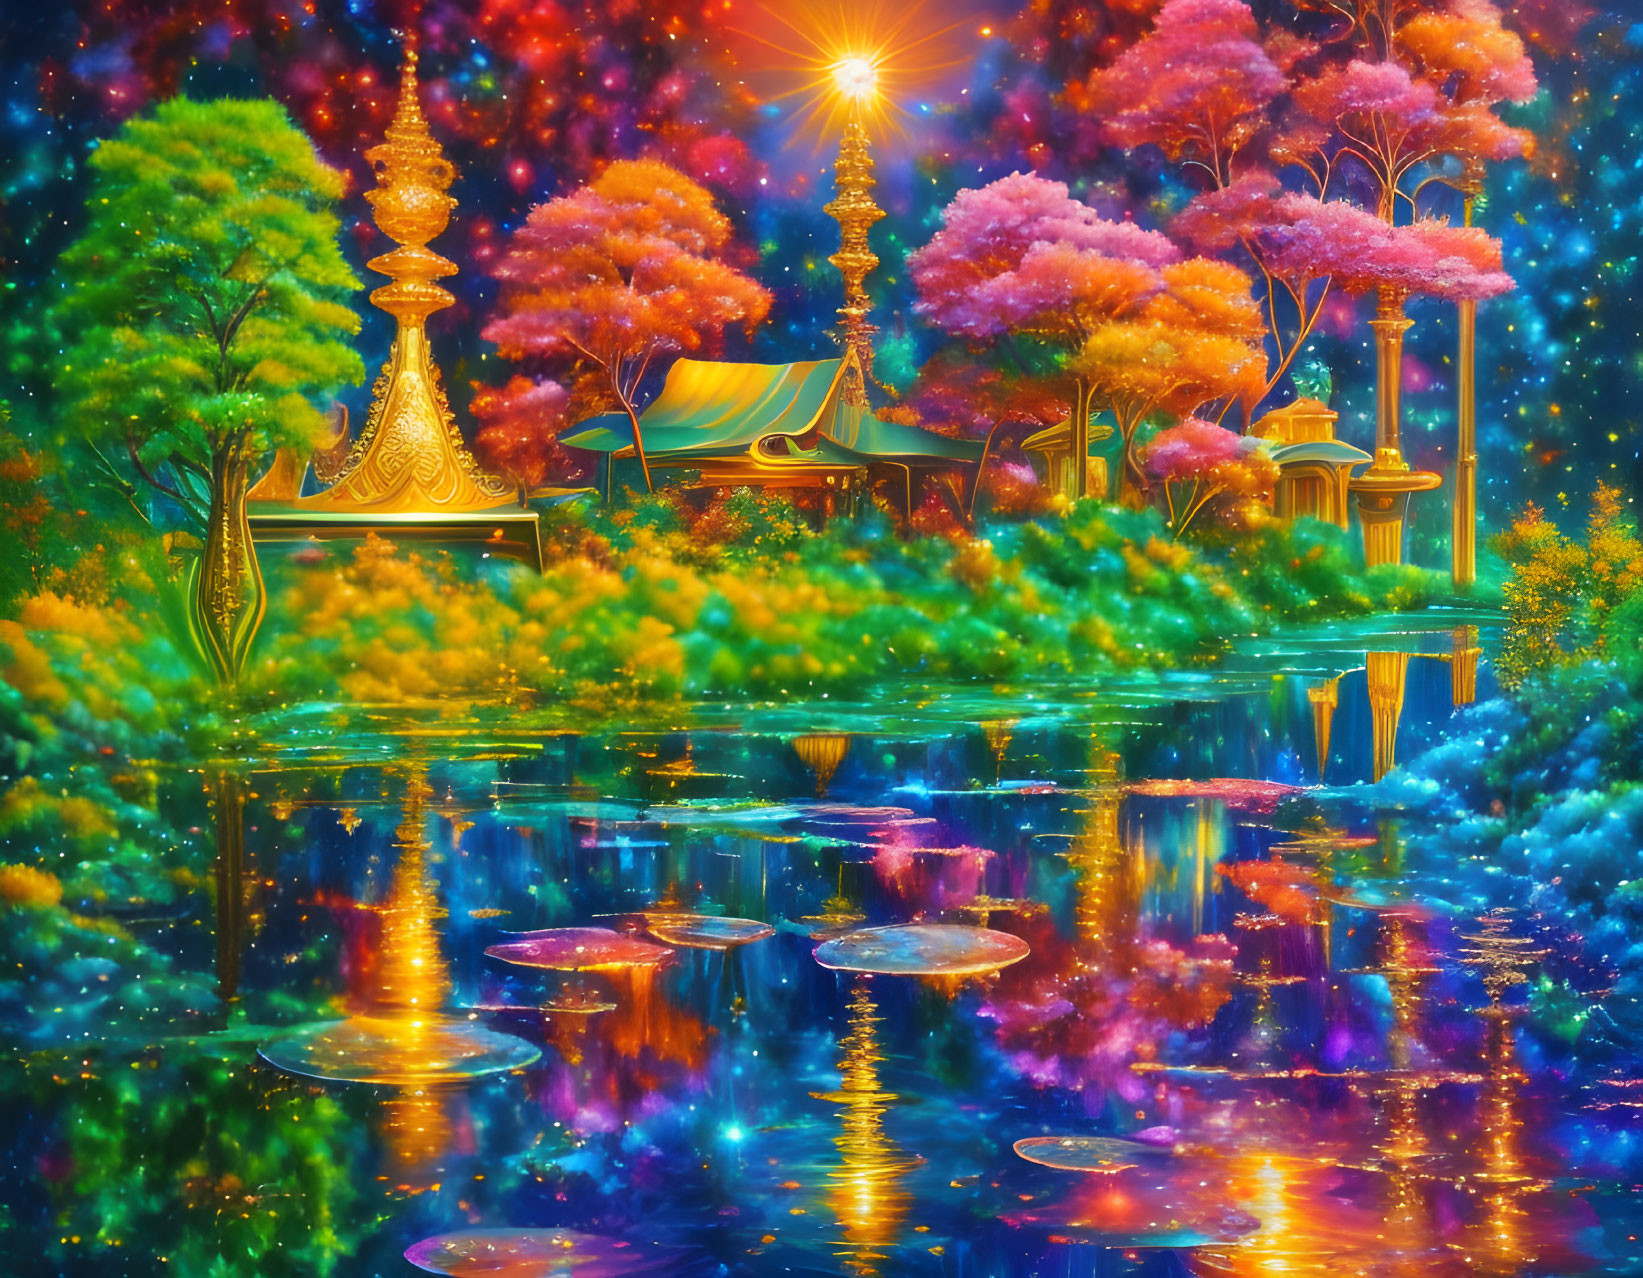 Colorful Neon Trees in Fantasy Landscape with Starry Sky and Reflective Water